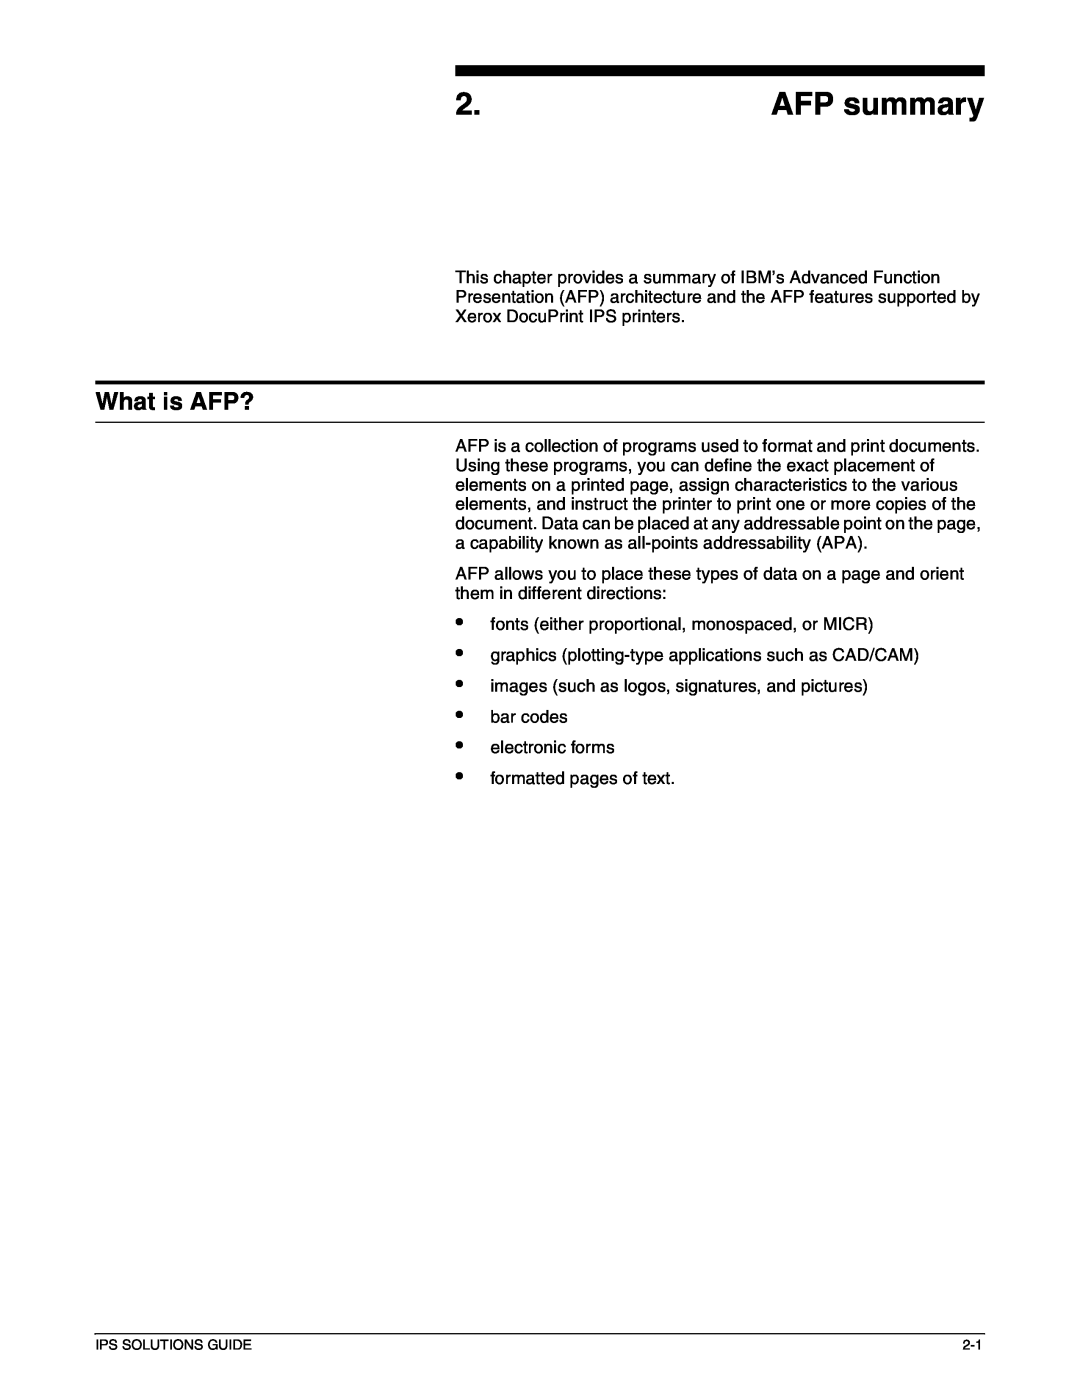 Xerox 721P88200 manual AFP summary, What is AFP?, • • • • • • 